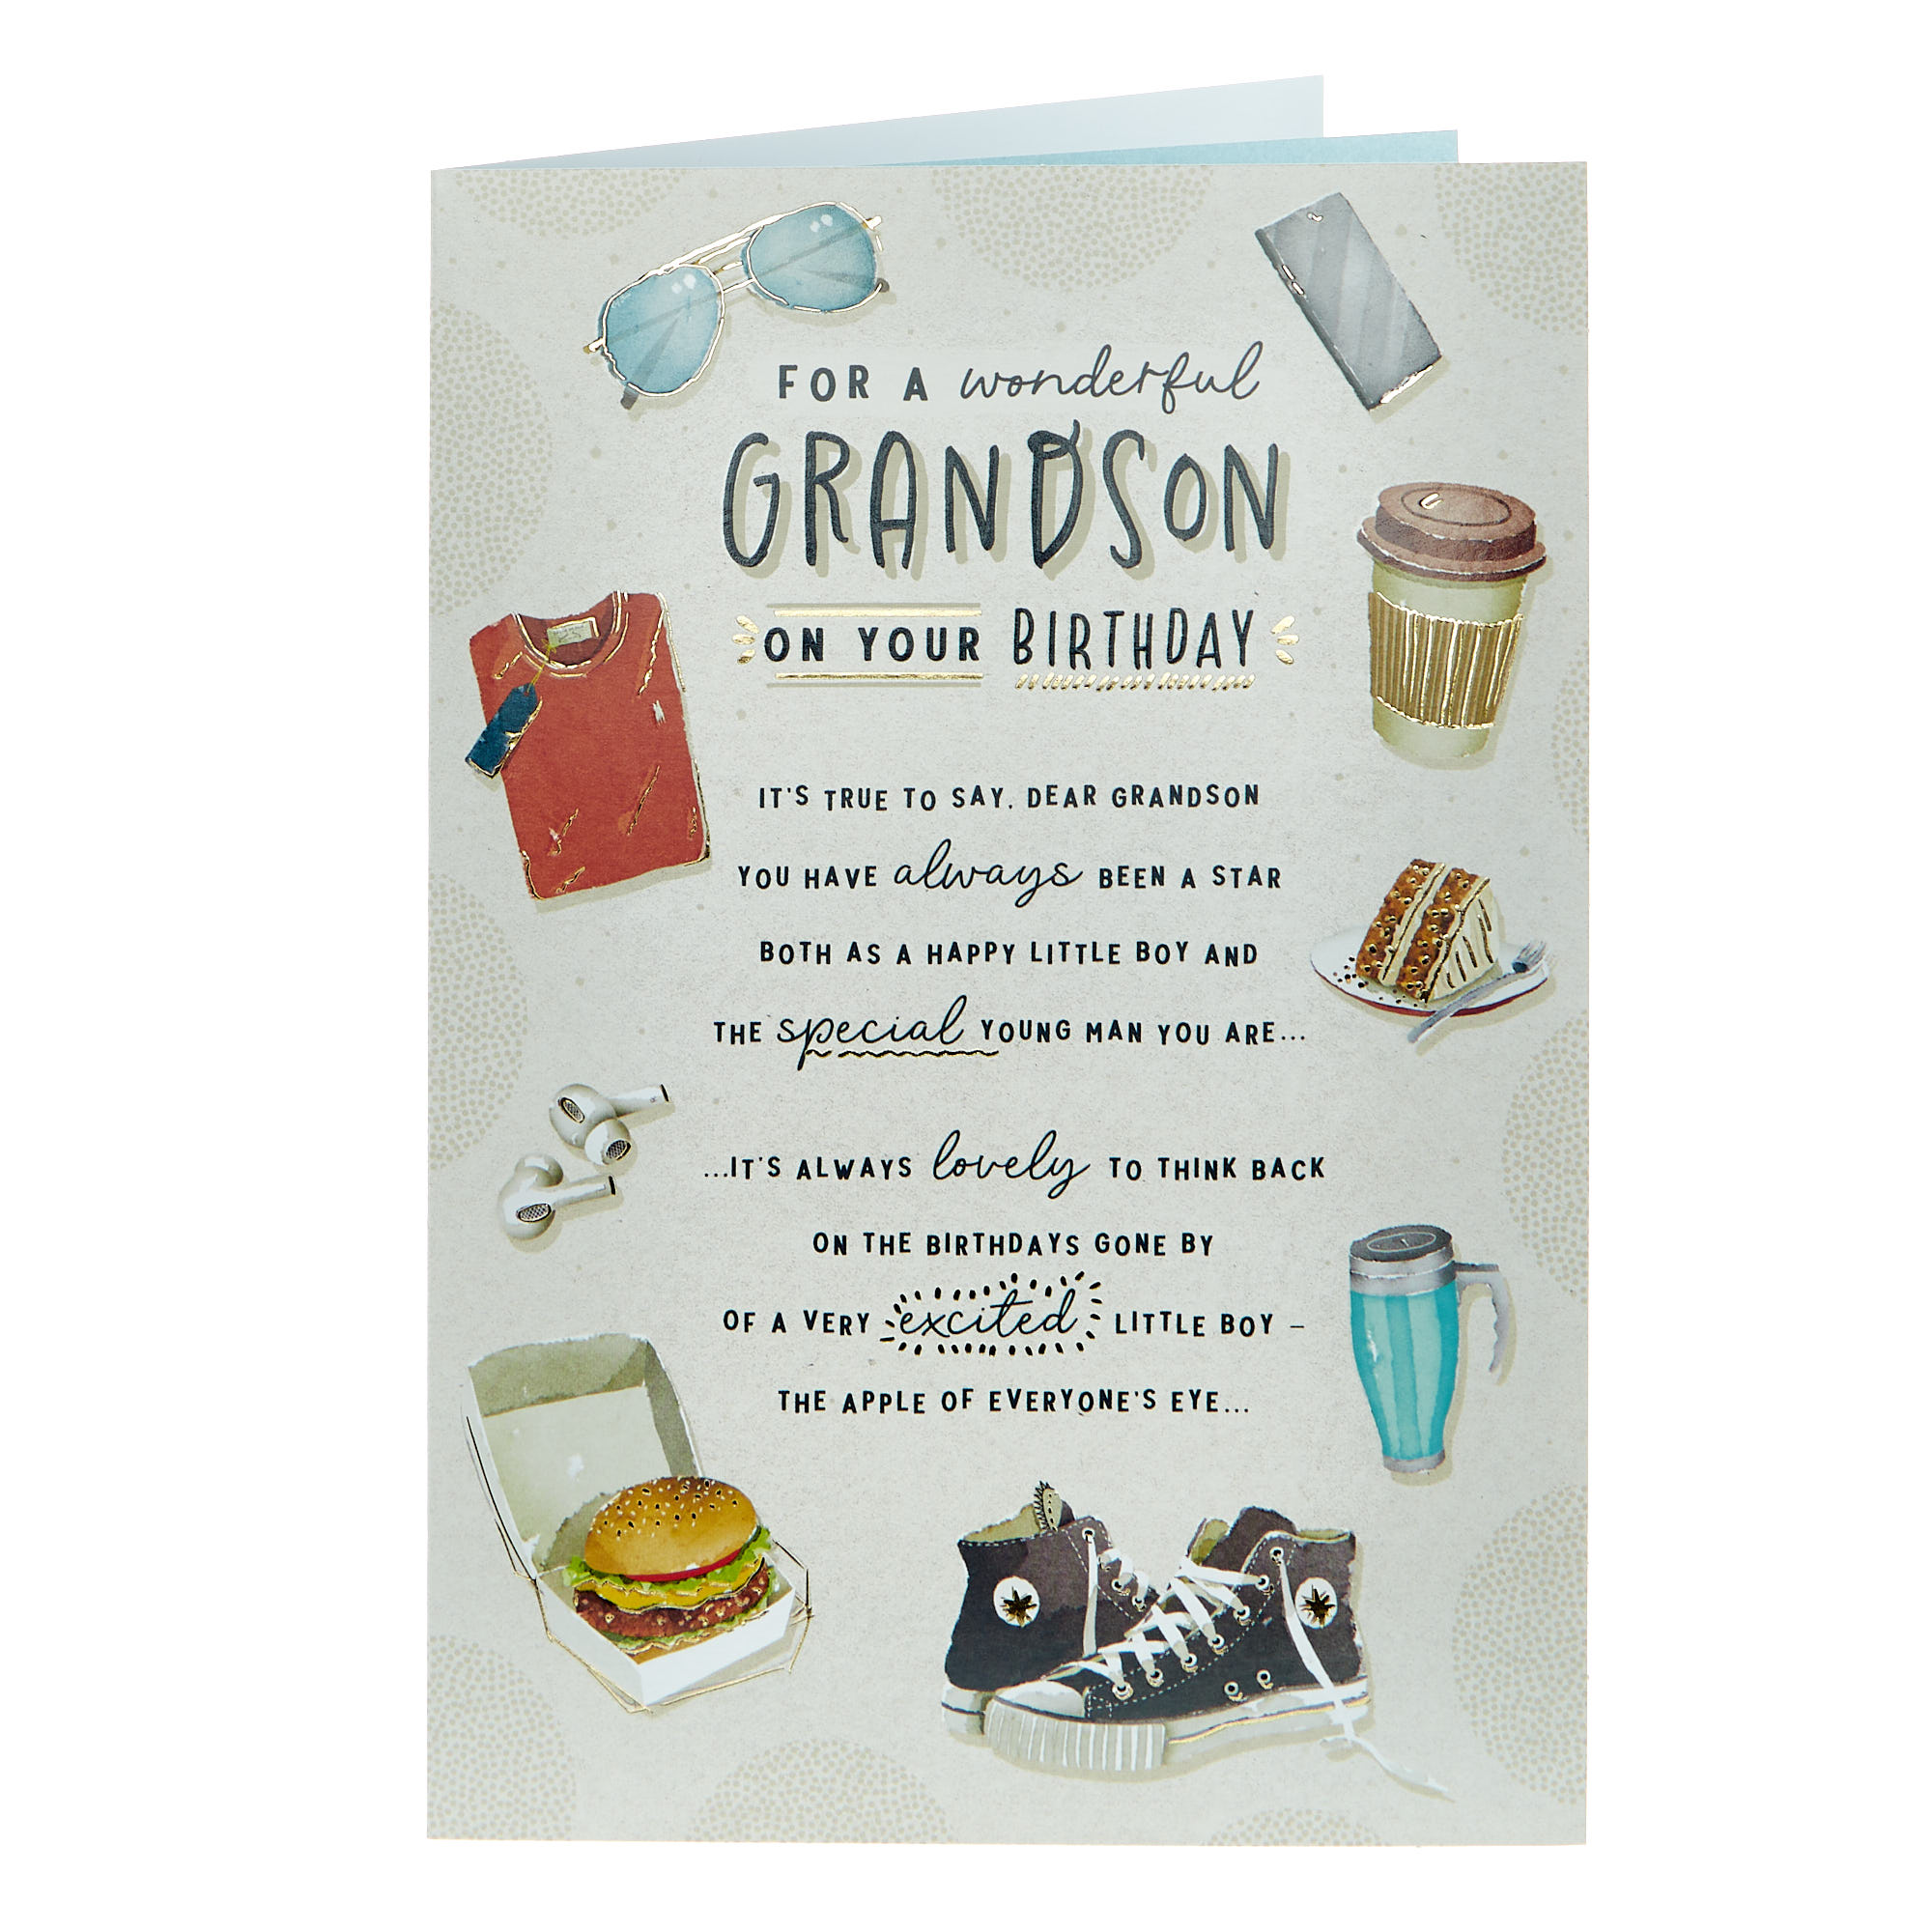 Grandson Special Young Man Birthday Card